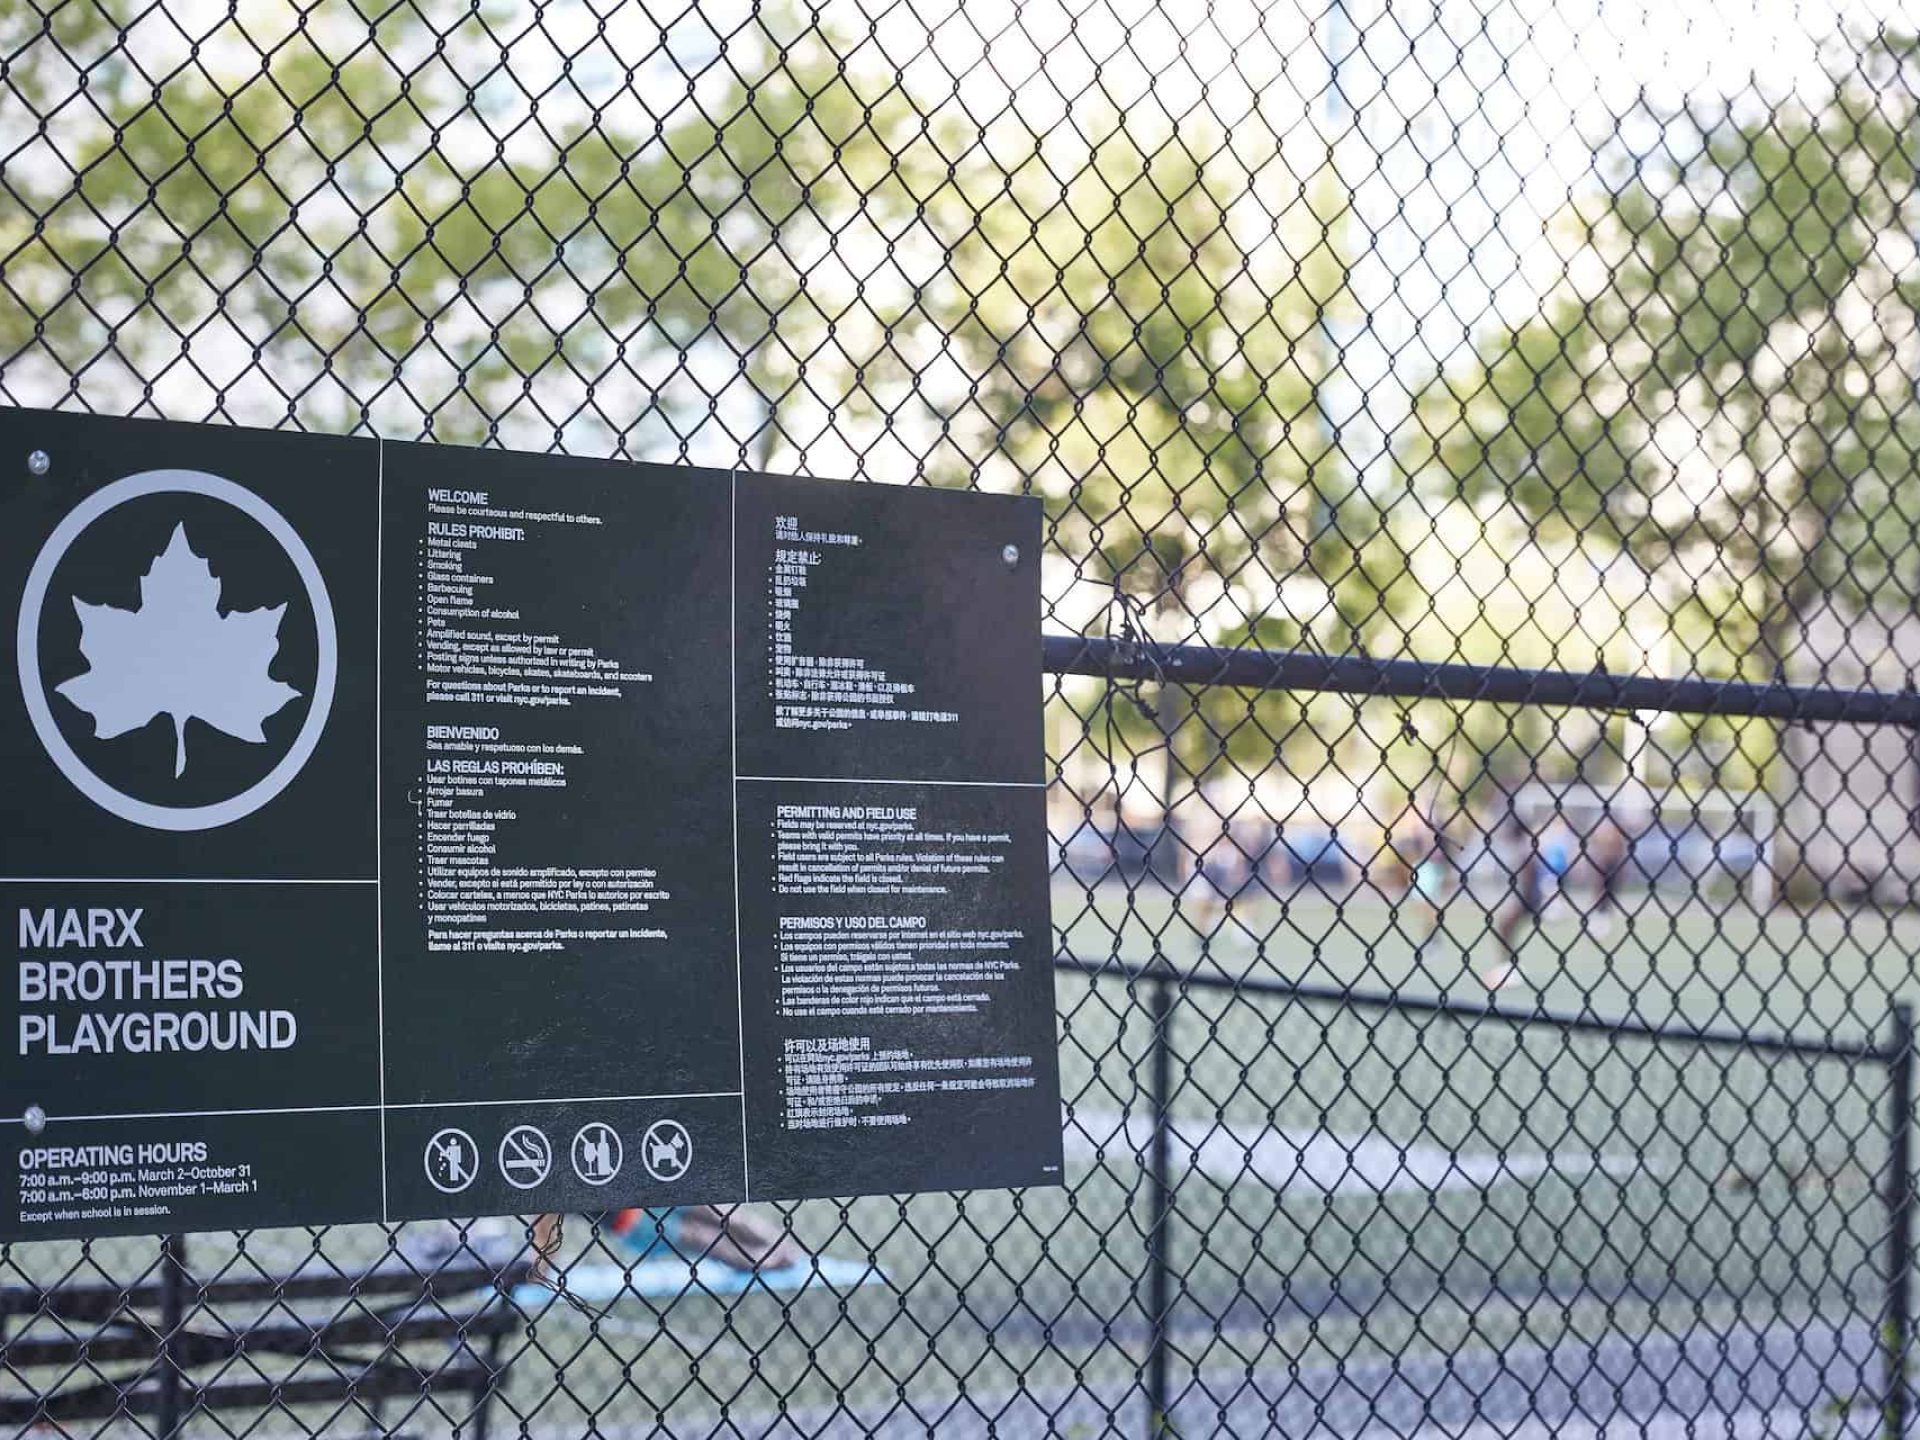 Close up of Marx Brothers Playground park sign. Green sign with white text and images mounted on a wire fence.